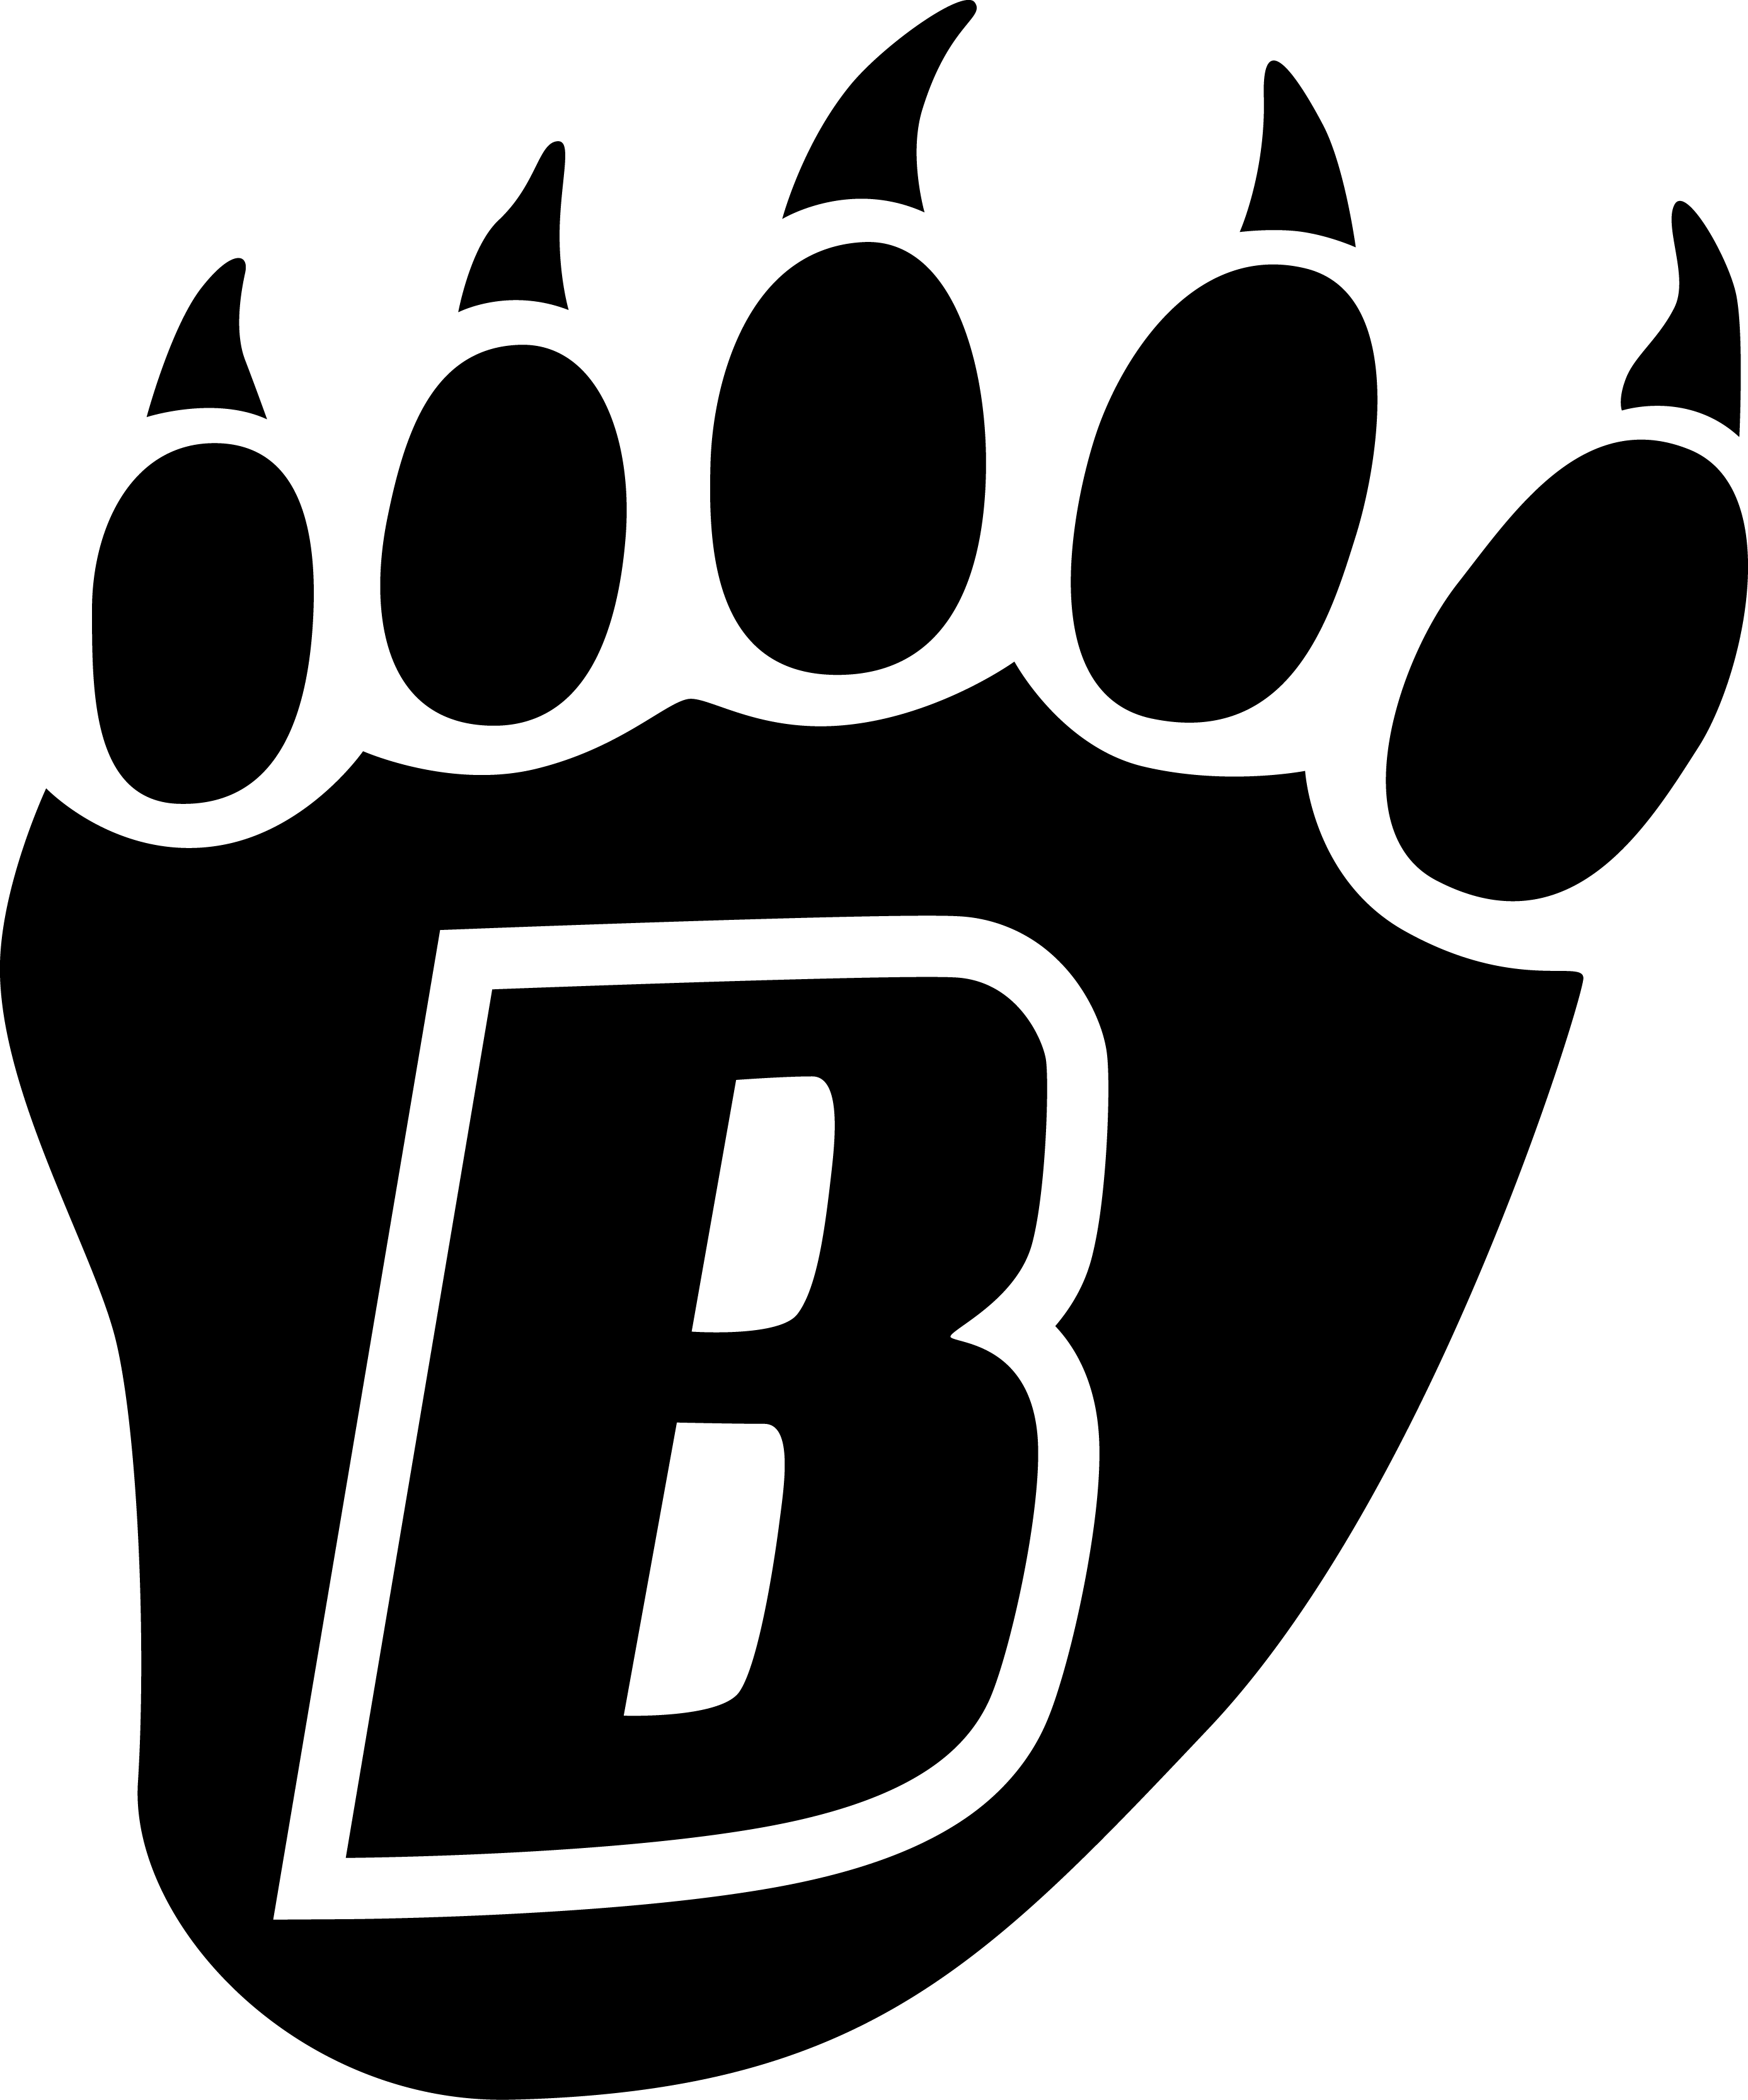 Black and White Bears Logo - Style Guide